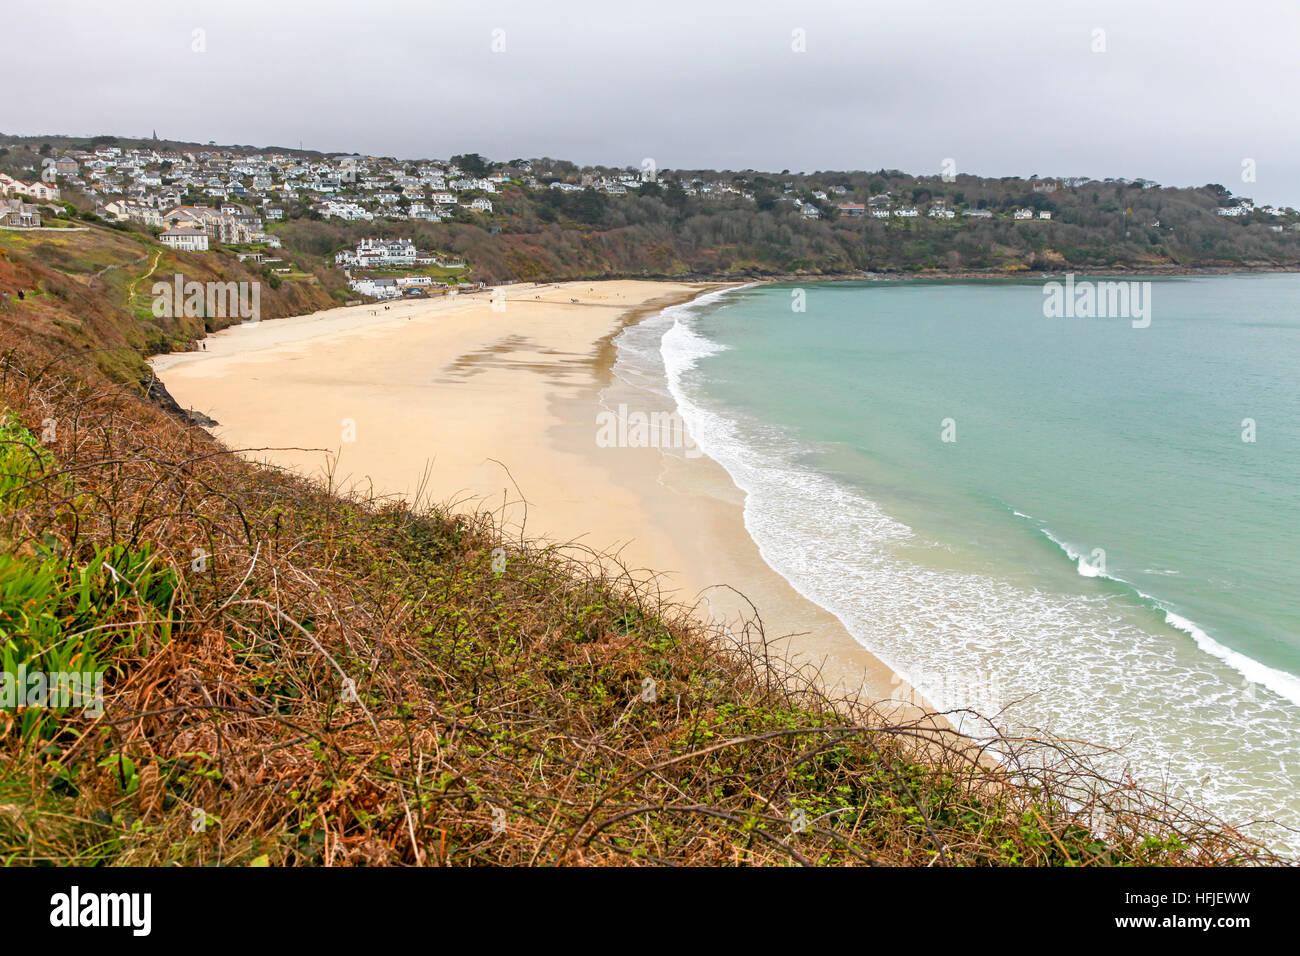 Carbis Bay beach or Barrepta Cove near the mouth of the Hayle Estuary harbour town of St Ives, Cornwall South West England UK GB Stock Photo